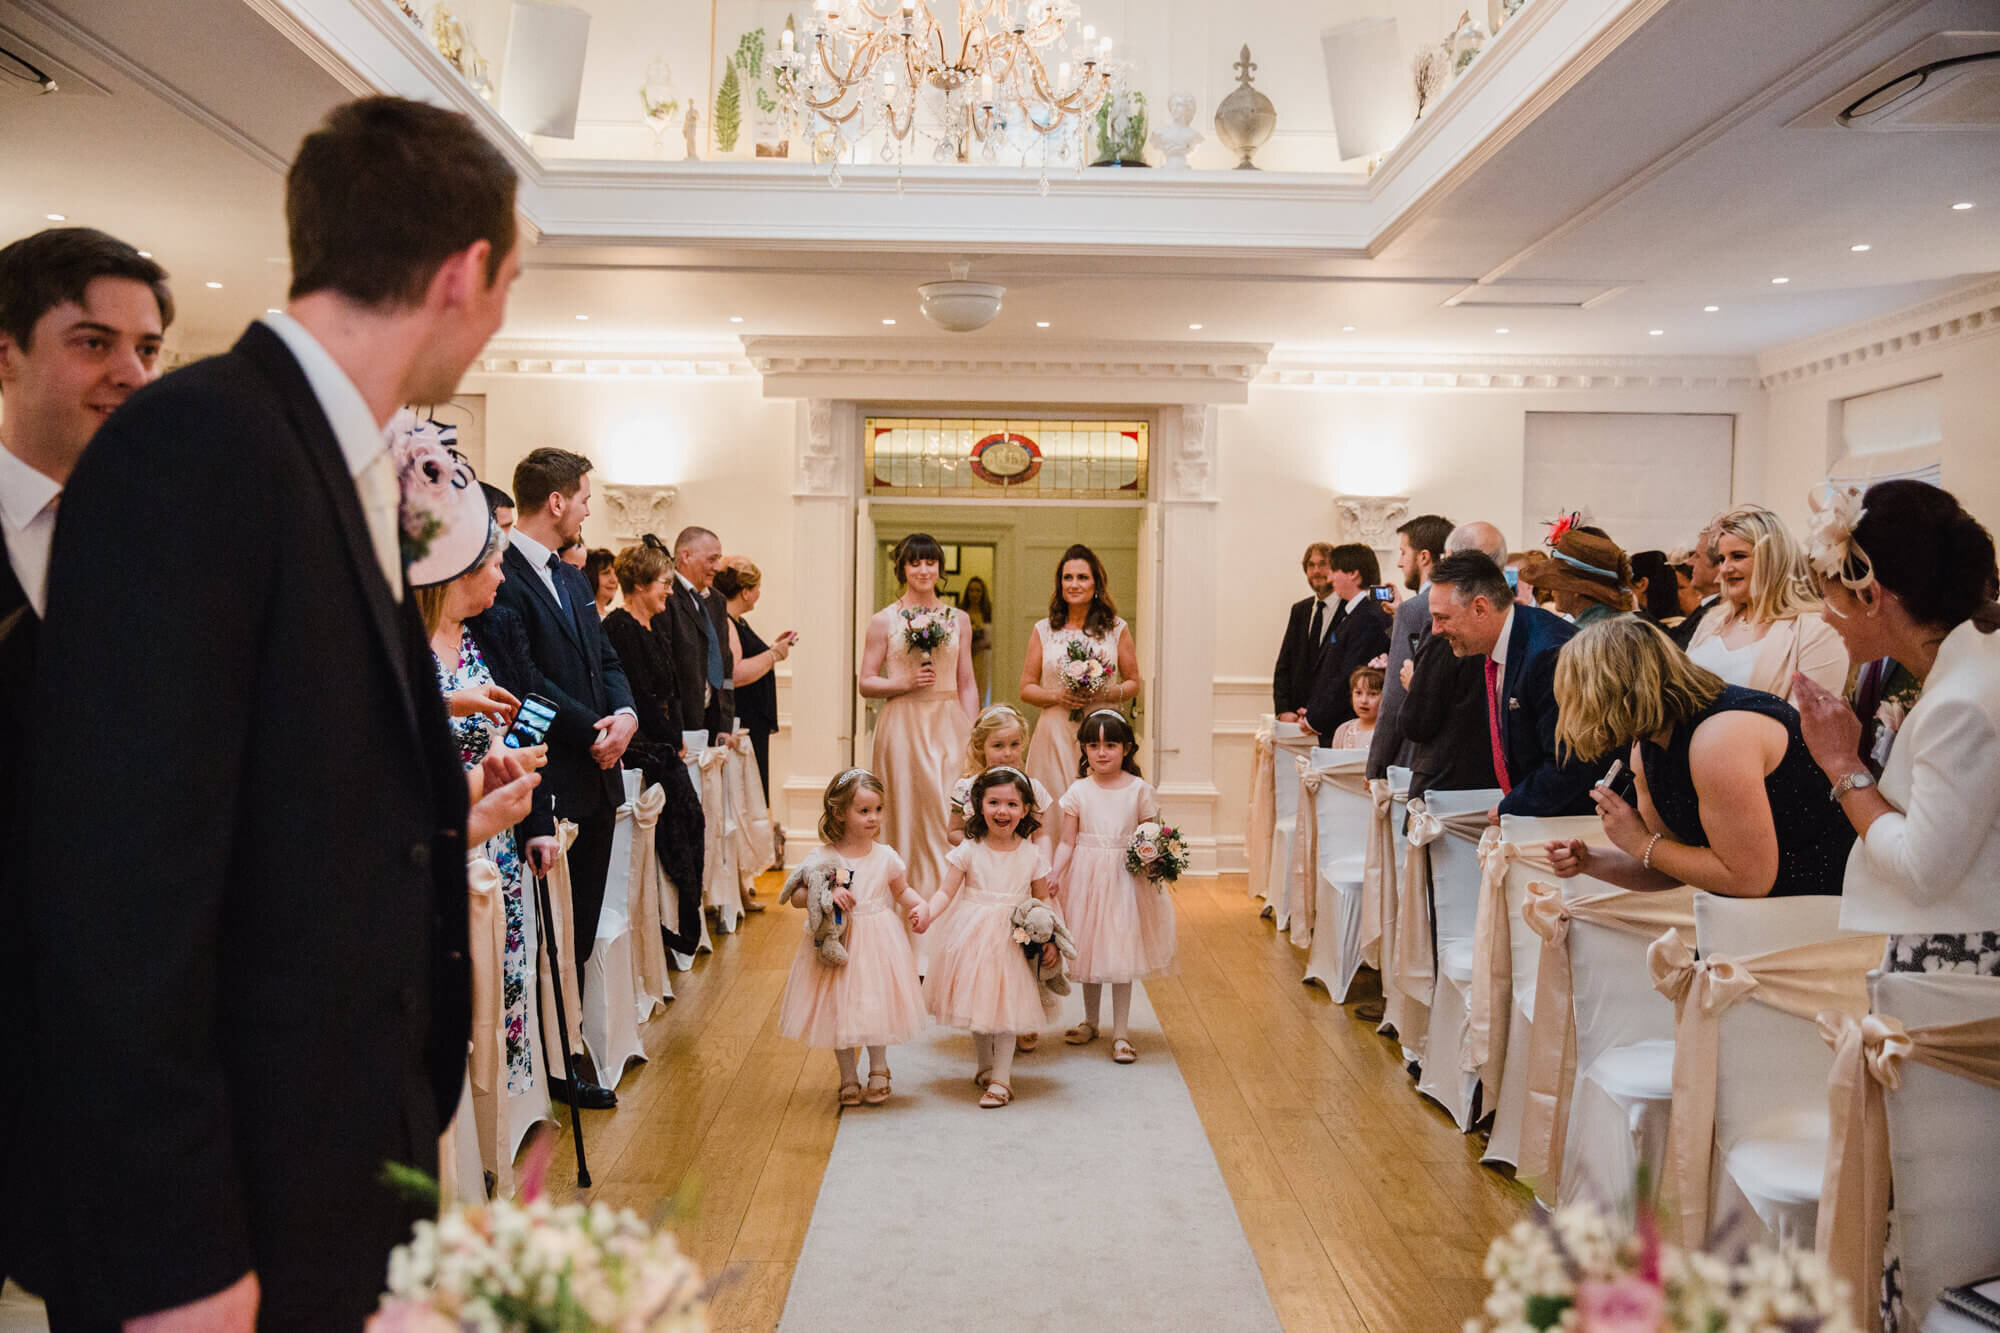 flower girls walking down aisle holding bouquets during entrance processional